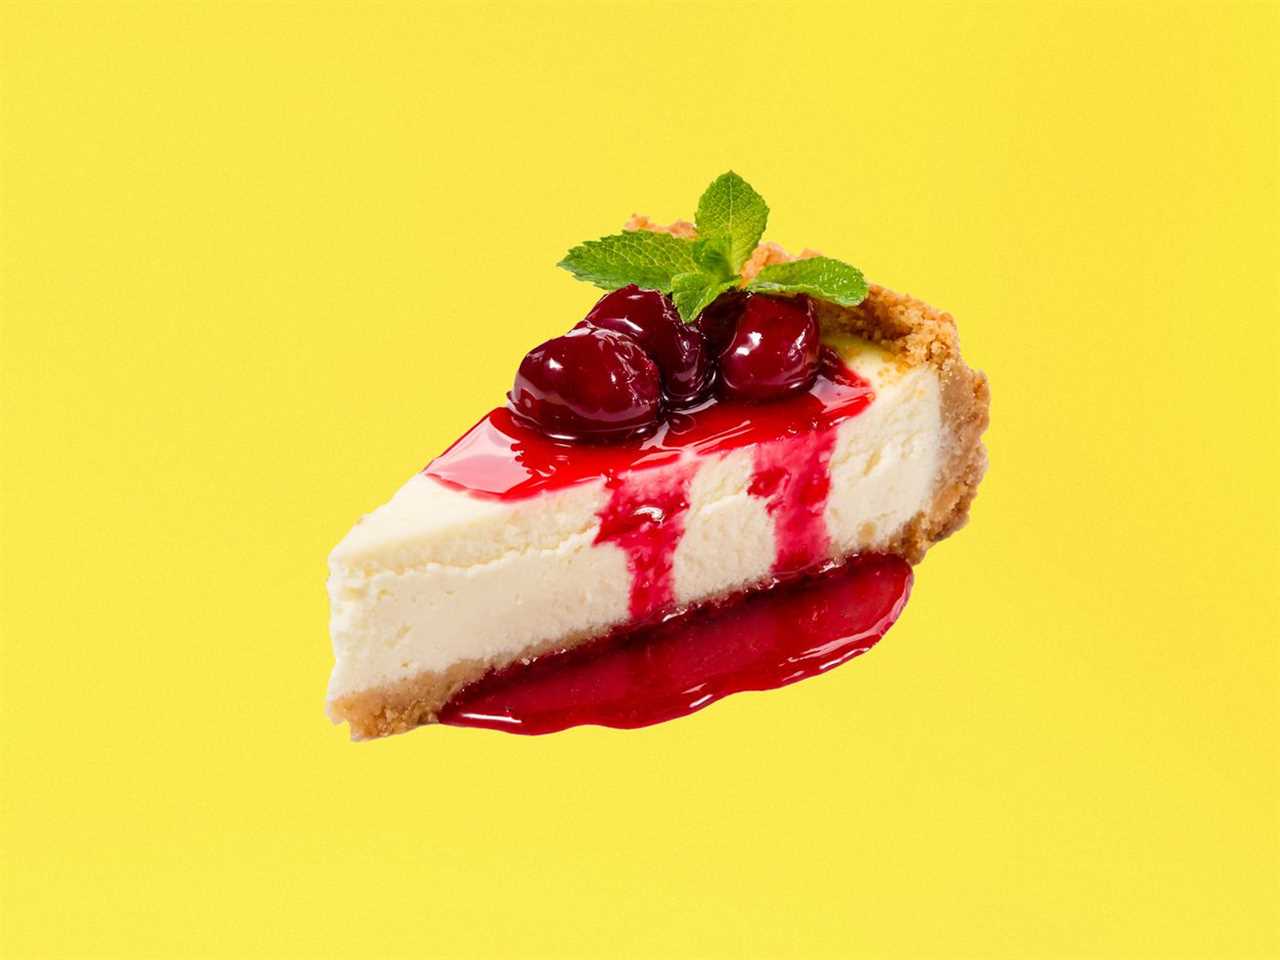 A slice of cheesecake with cherries and red sauce and a mint sprig, floating on a neutral background.